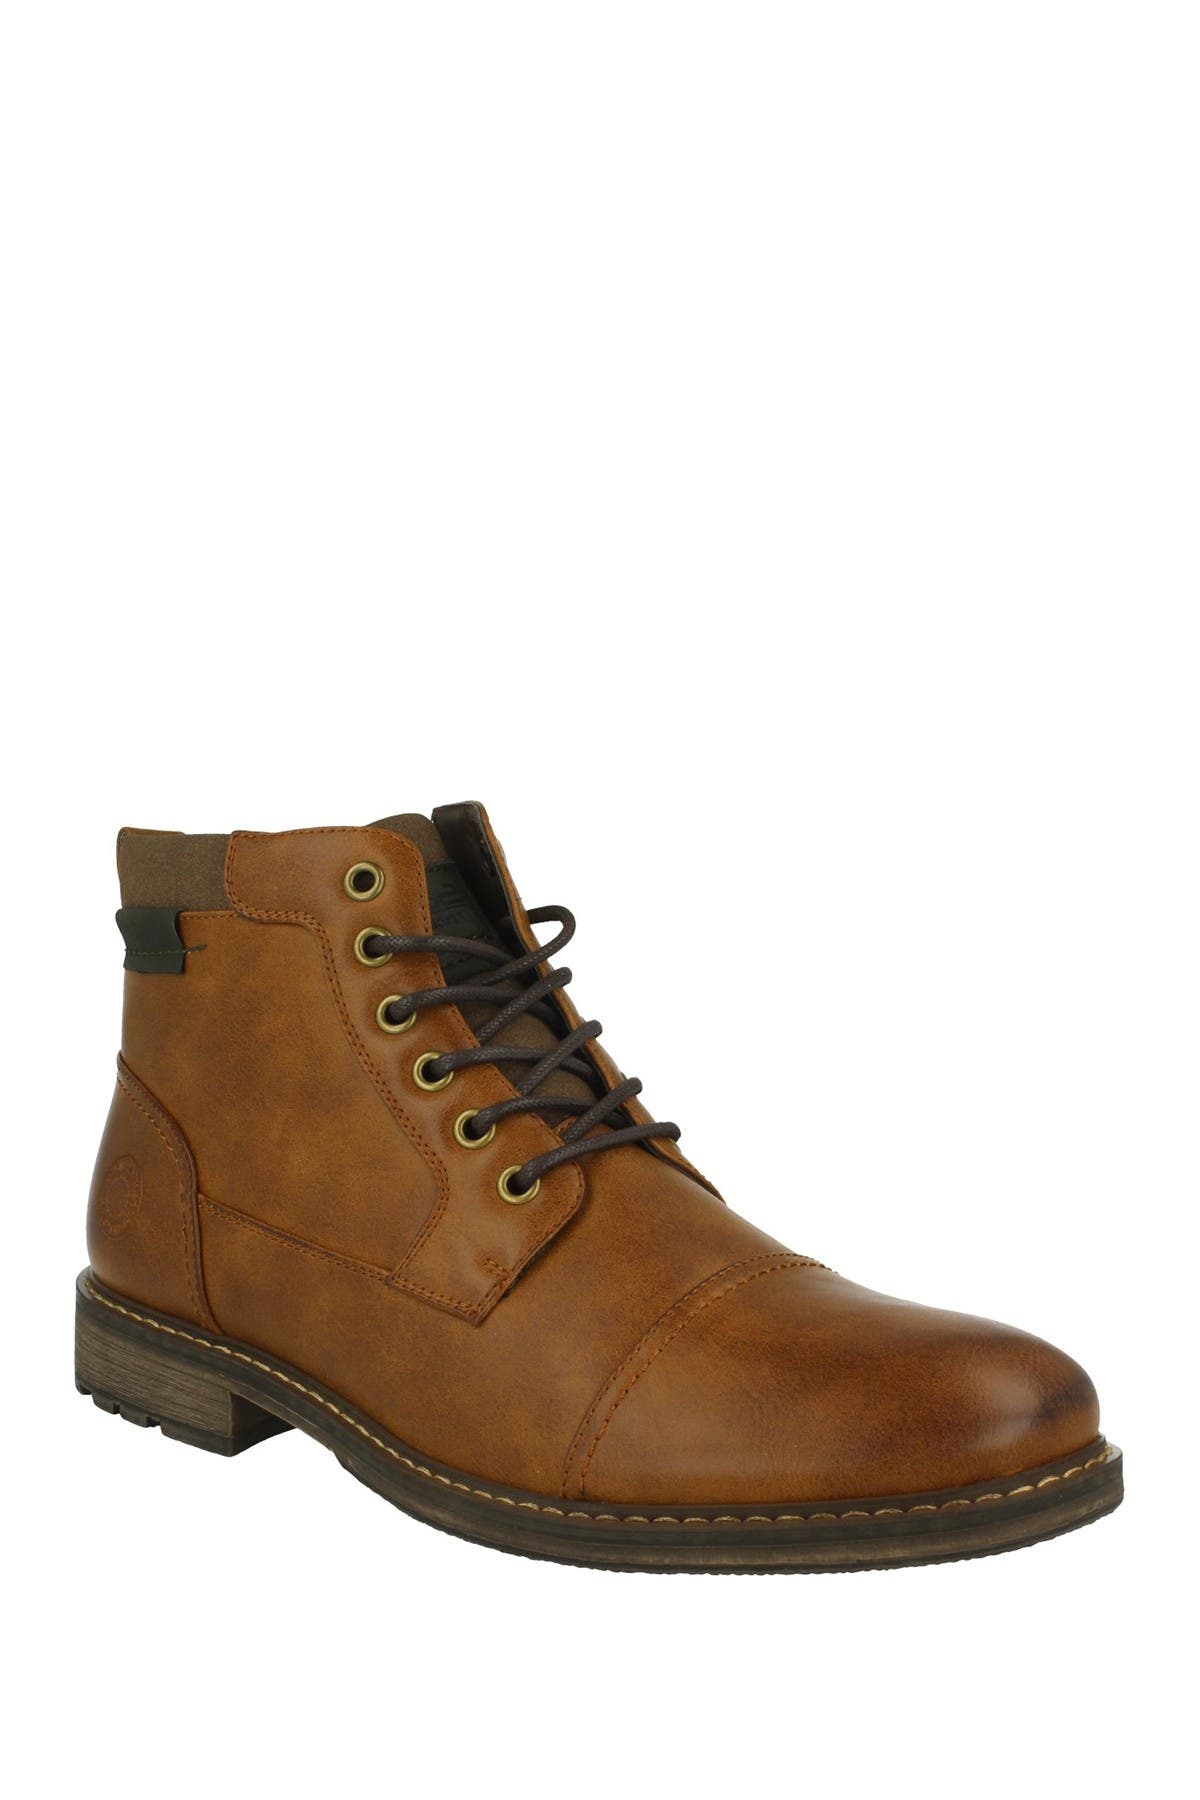 B52 by Bullboxer | Tylier Mid Cut Boot | Nordstrom Rack